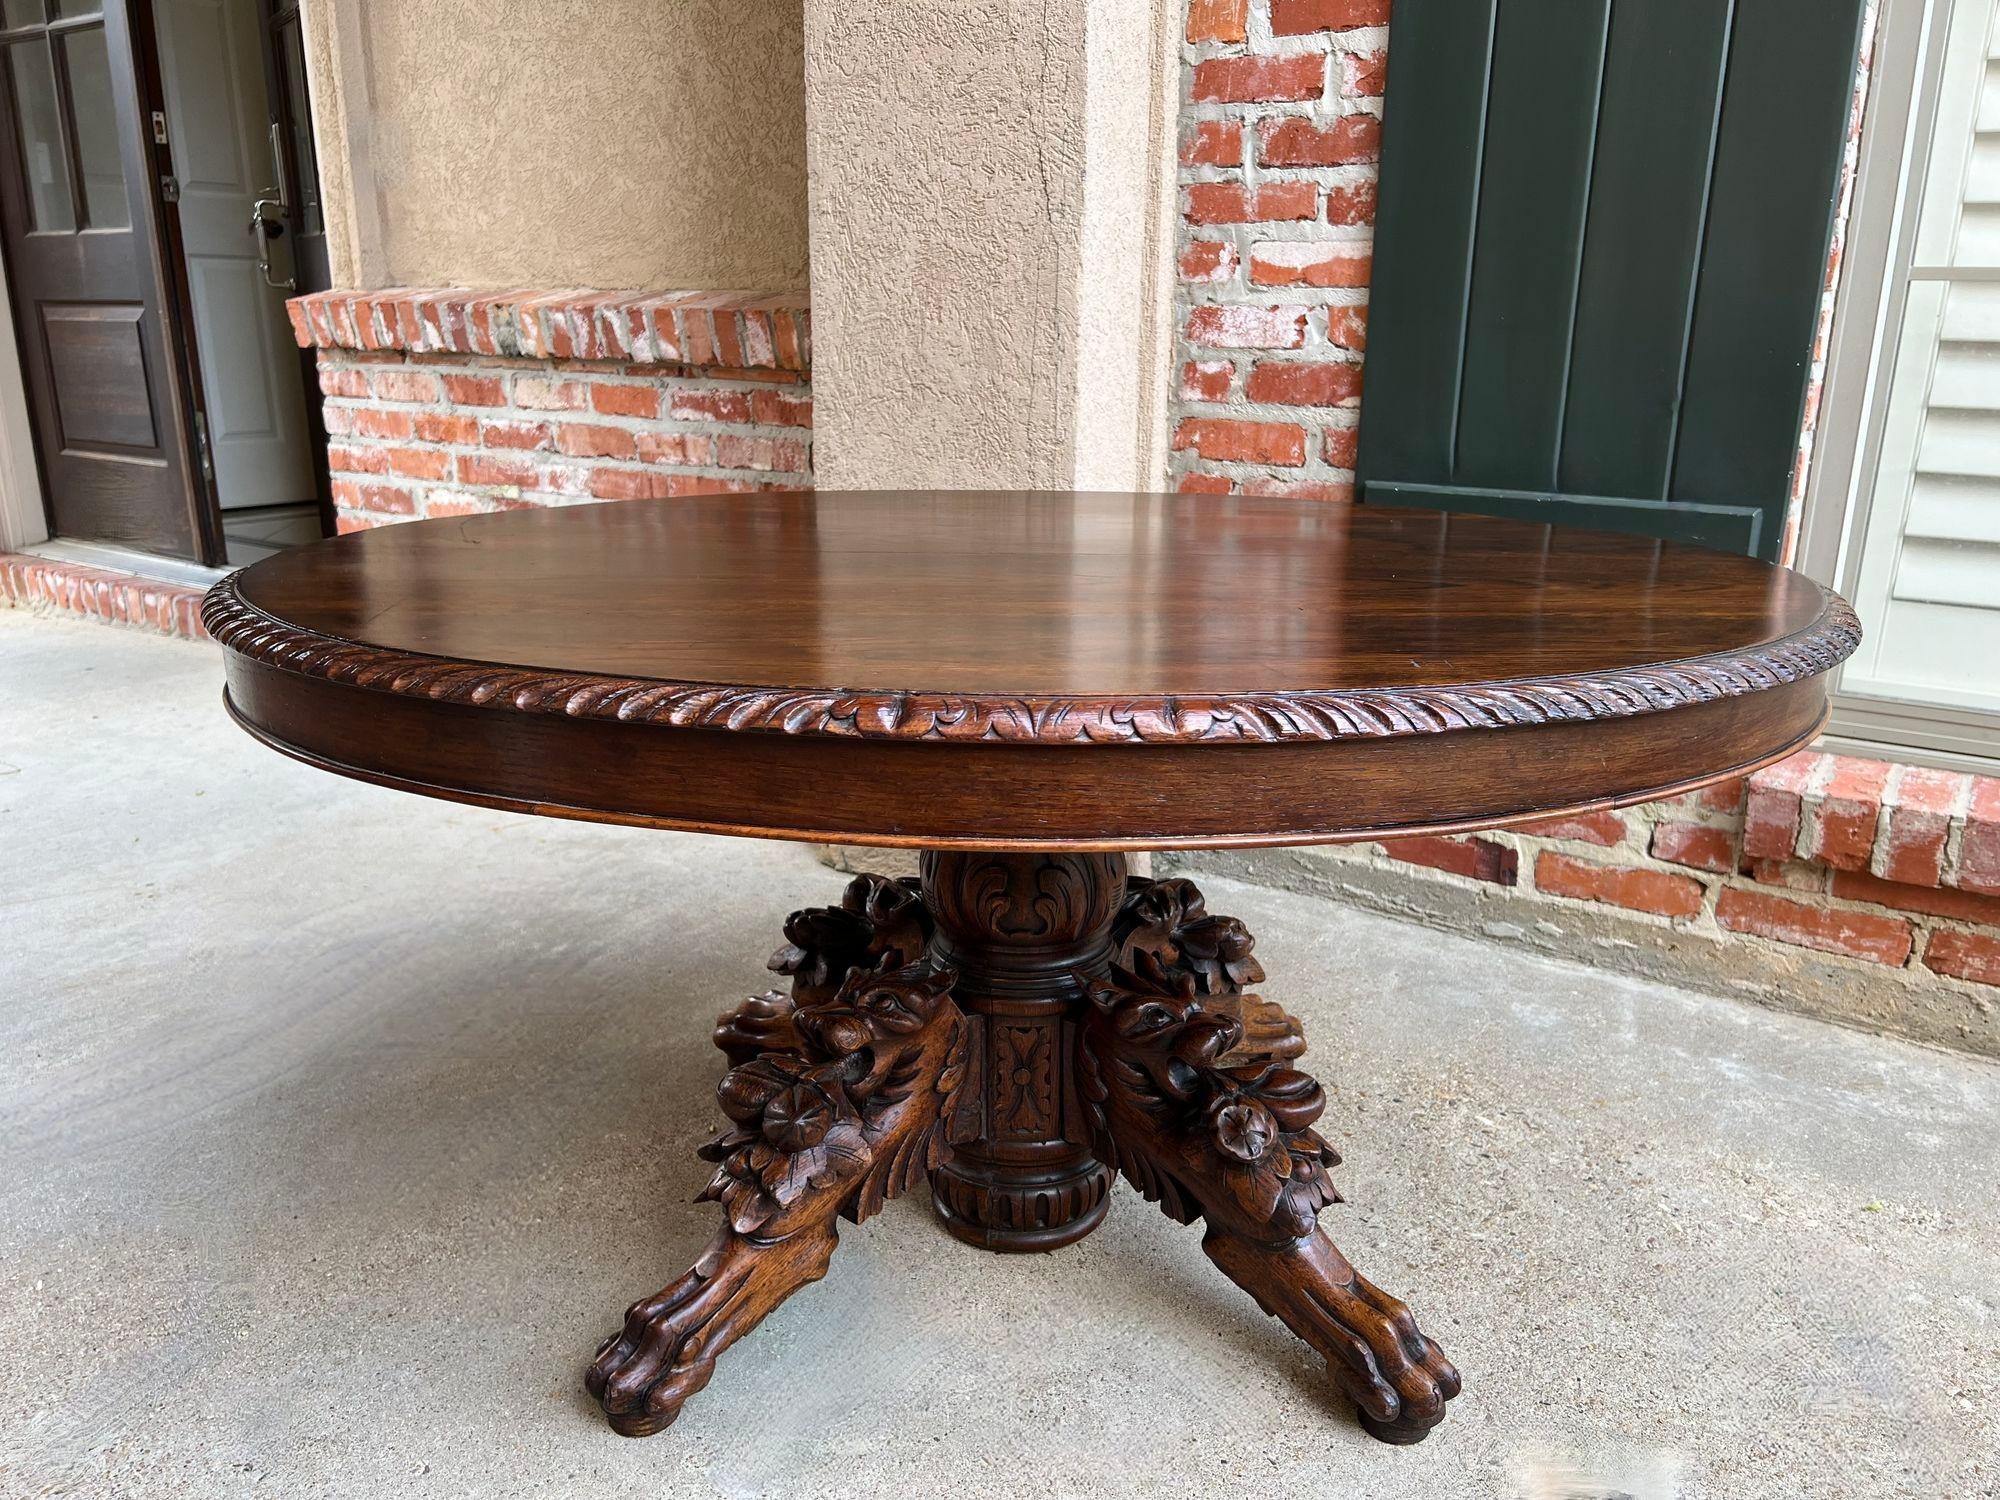 Antique French Oval Center Hunt Lodge Table Carved Black Forest Pedestal Coffee Table.

Direct from France, a large and substantial 19th century hand carved solid oak table!! Superior carvings, craftsmanship and artistry; the huge turned pedestal